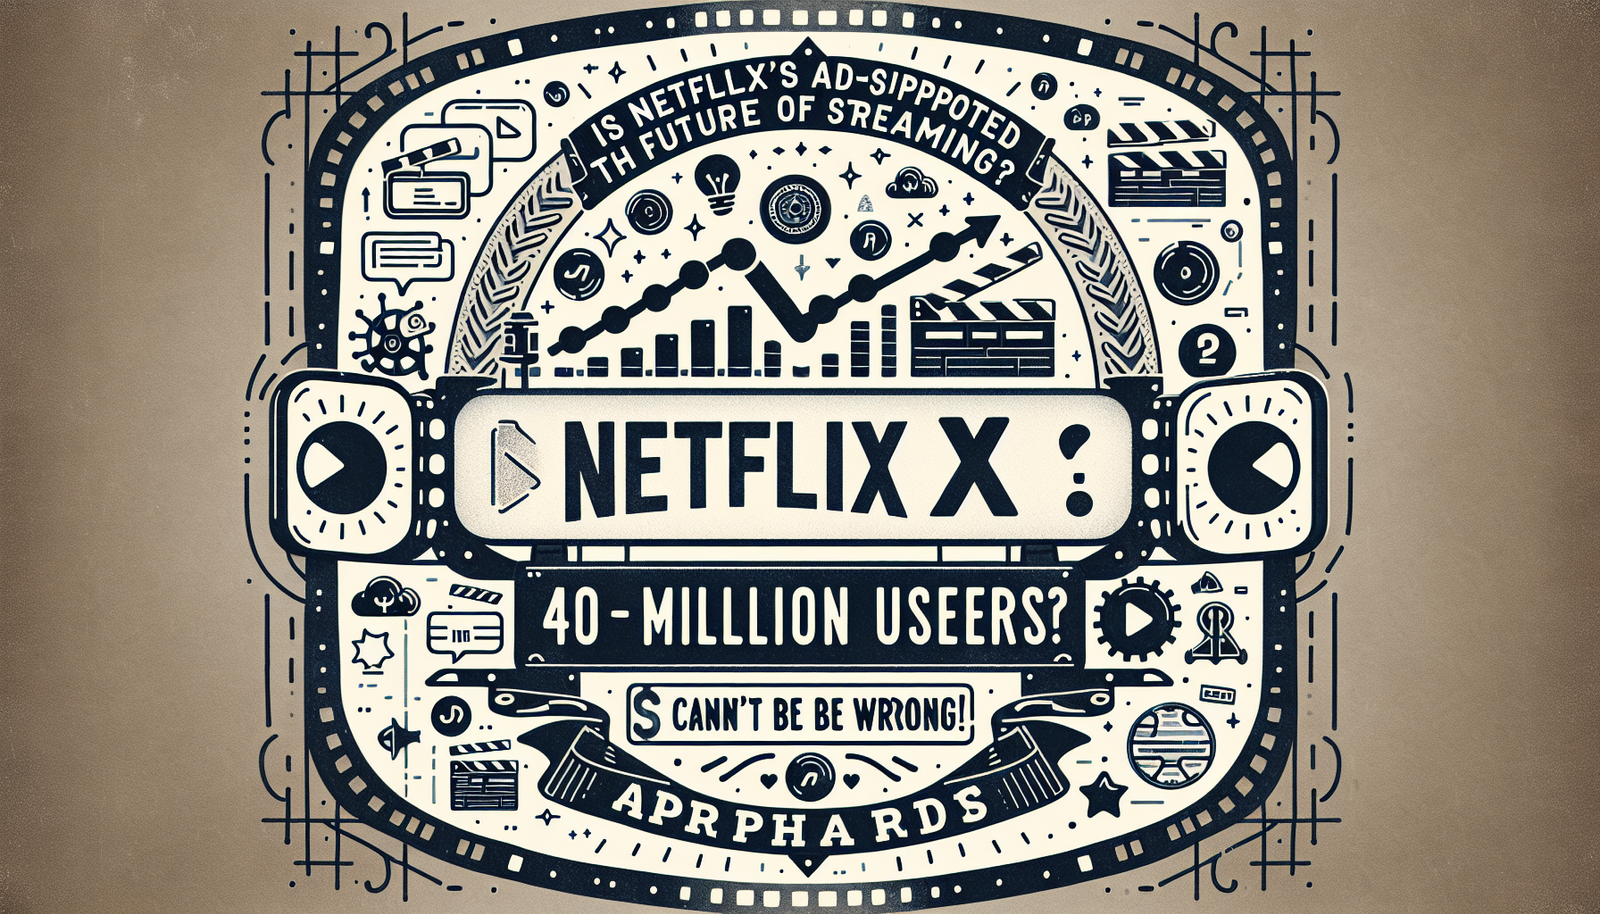 learn about netflix's potential ad-supported tier and its impact on the future of streaming. discover why 40 million users are embracing this new model.